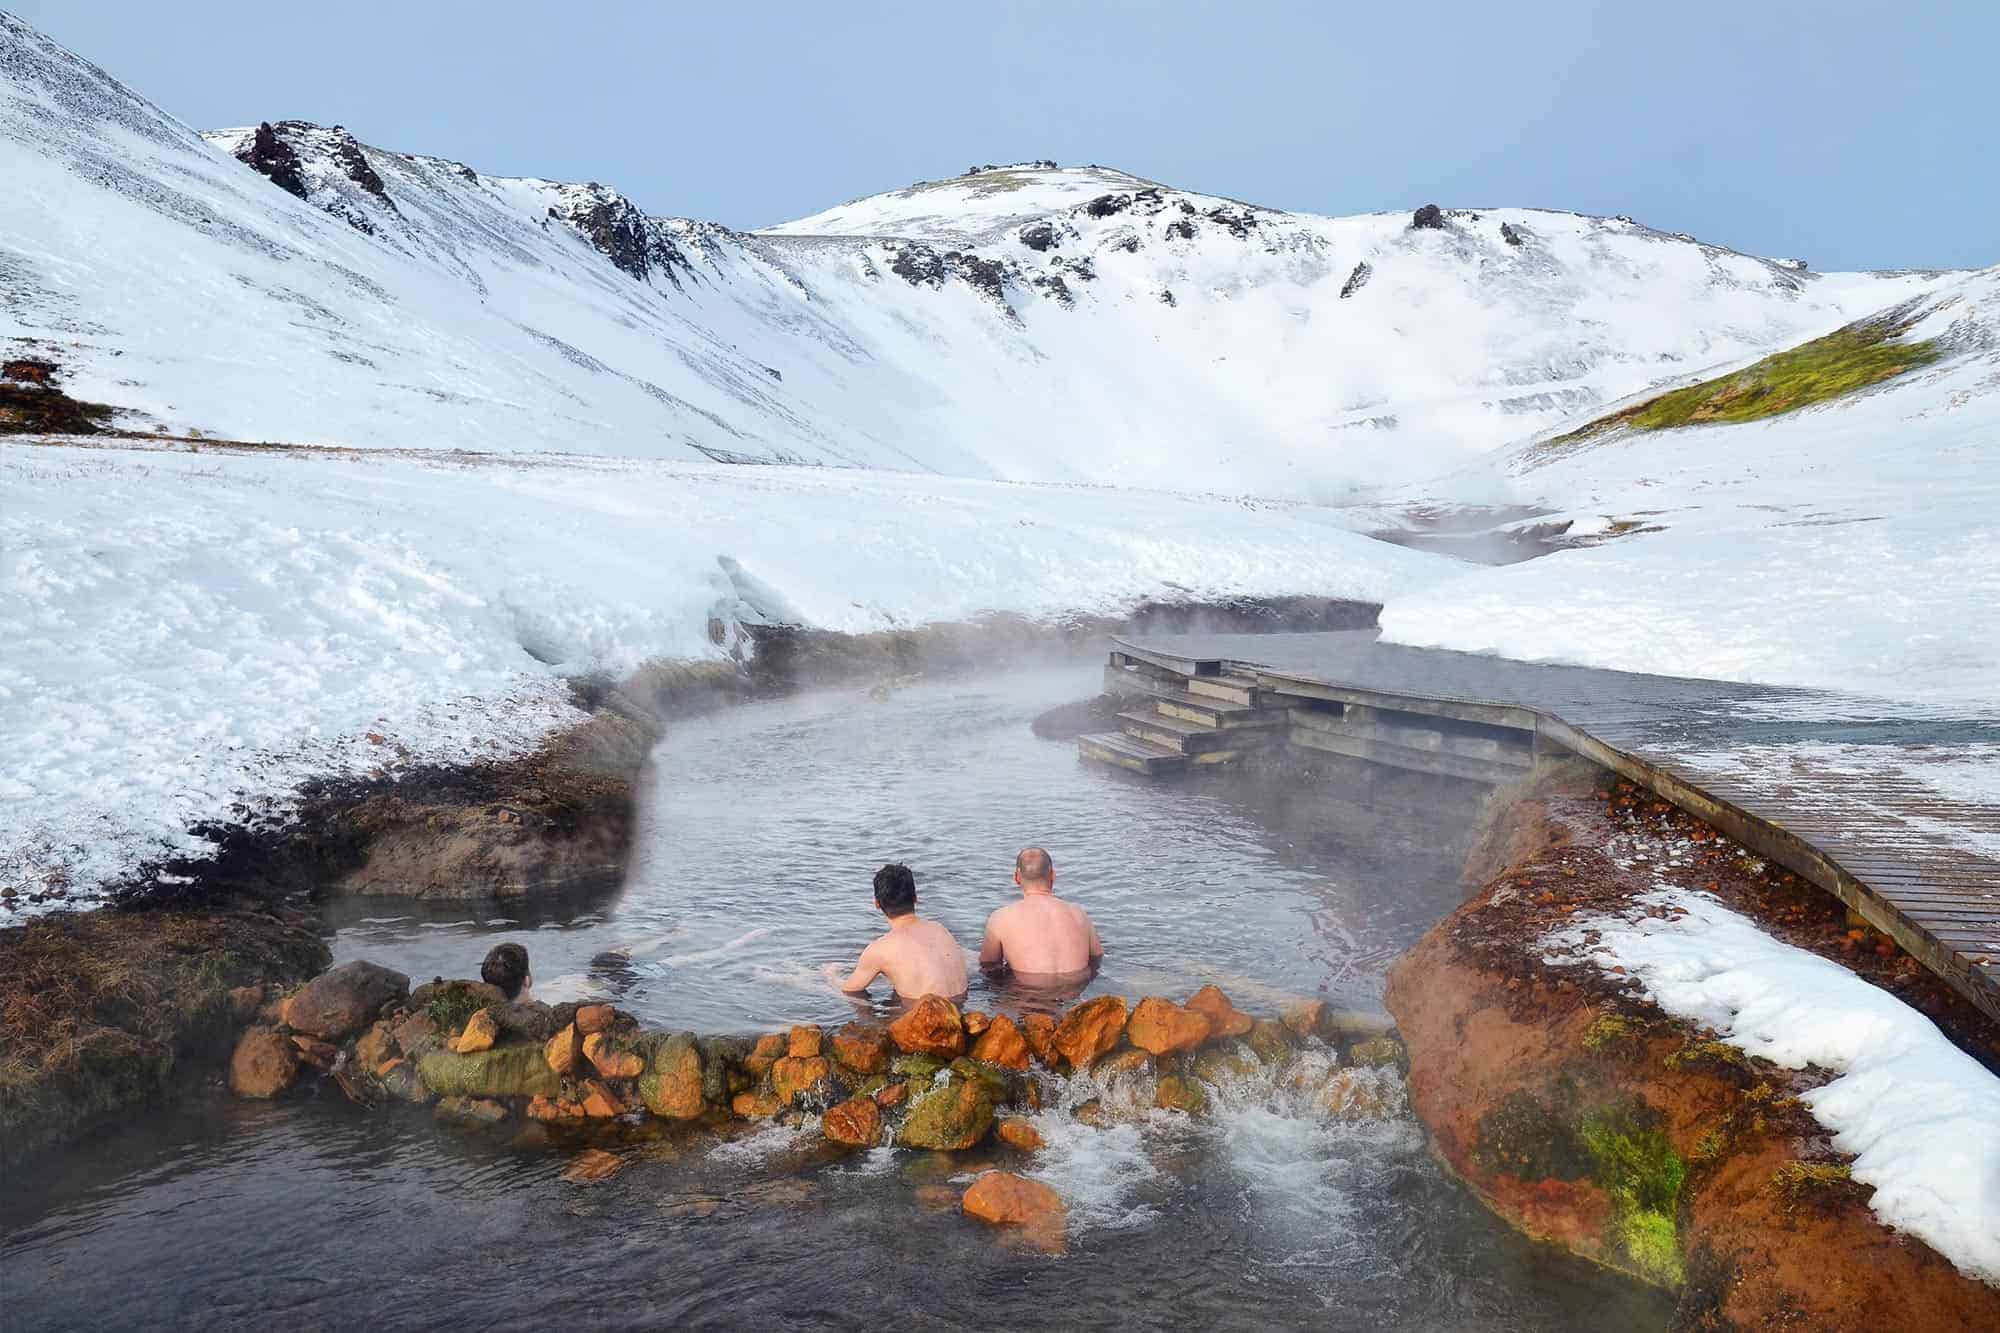 Three men soak in the Reykjadalur Hot Spring Thermal River in south Iceland on a snowy winter's day.